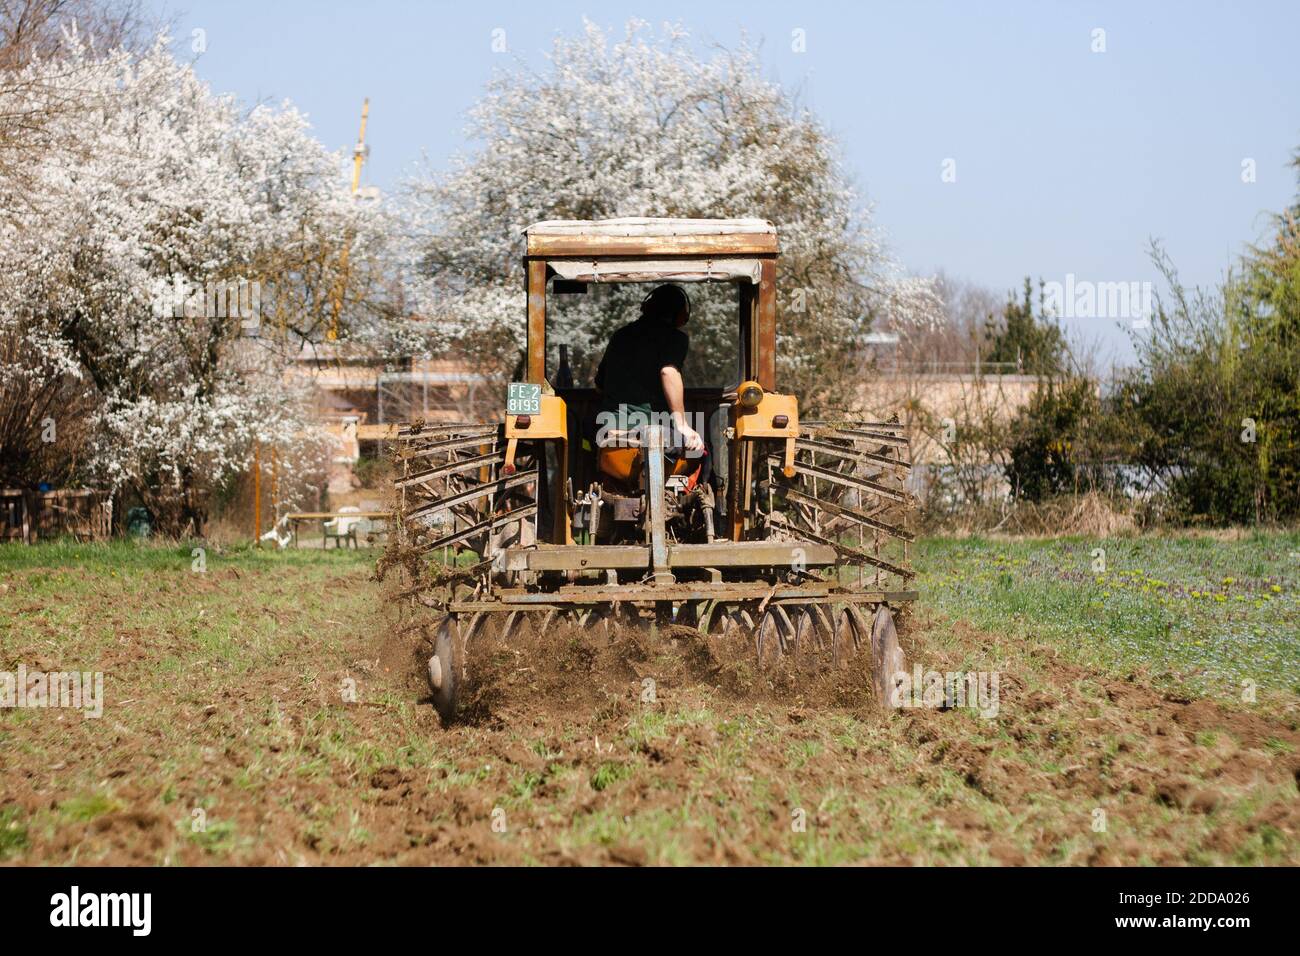 A farmer plowing a field with an old tractor Stock Photo